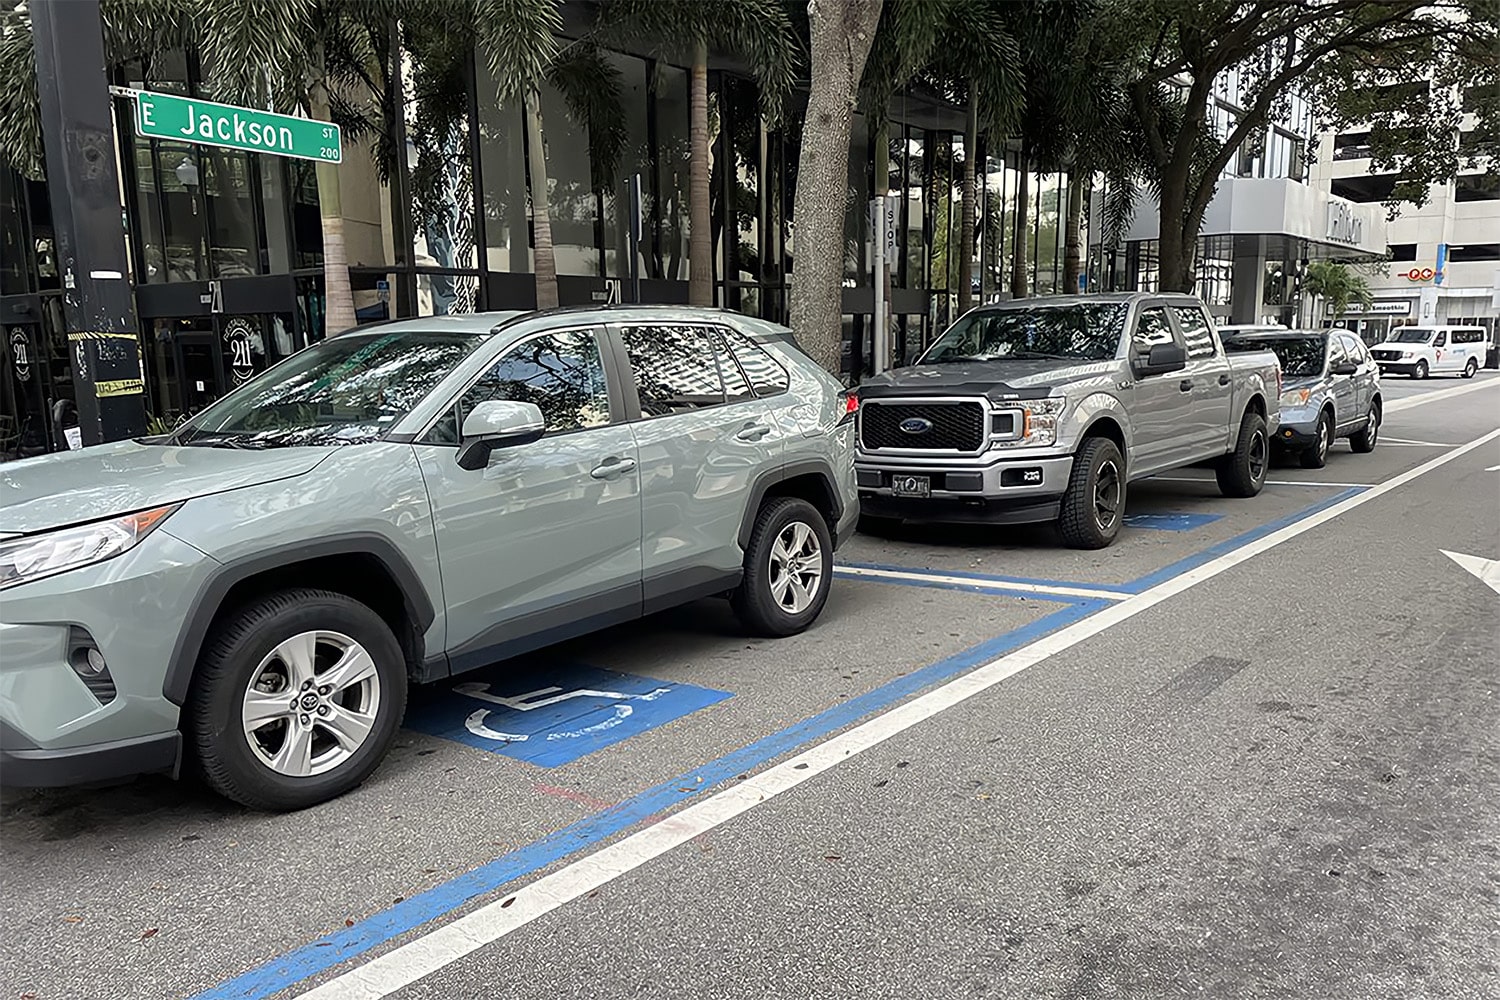 Photo of cars parked in accessible parking spaces on E. Jackson Street in Tampa Bay, FL